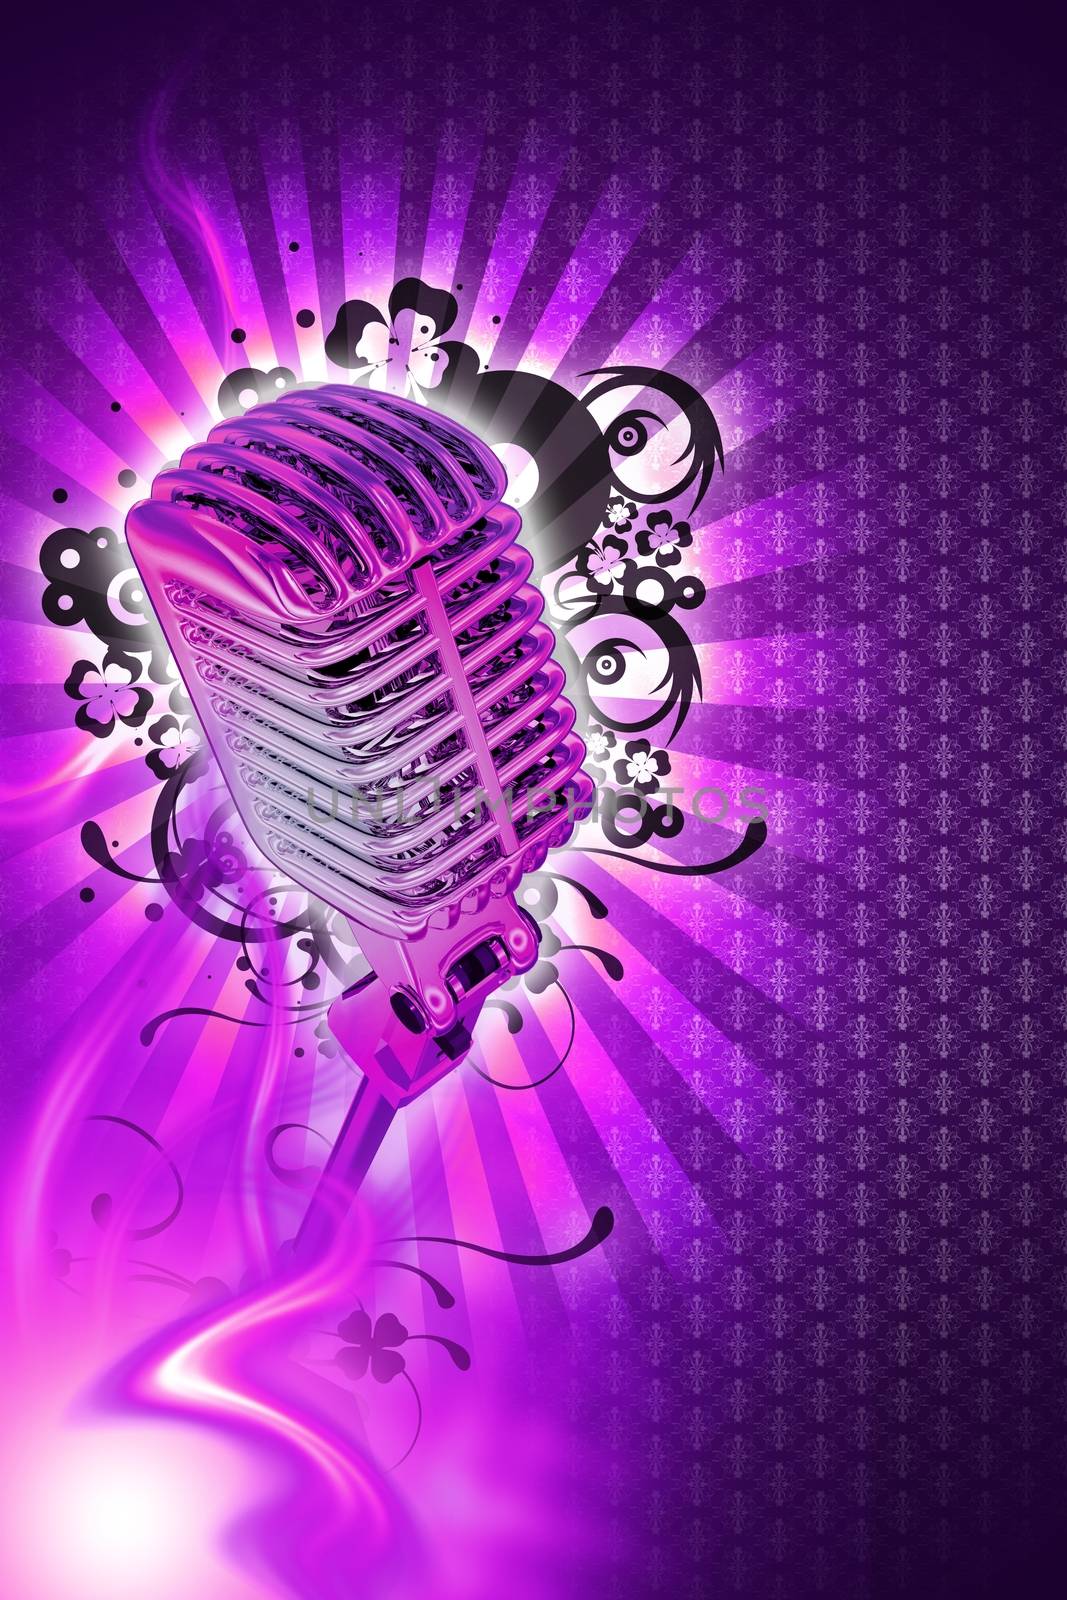 Pinky Karaoke Design. Karaoke Music Theme. Cool Pinky-Violet Background with Light Rays, Flames and Floral Ornaments and Cool Silver Retro Style Microphone. Vertical Design.